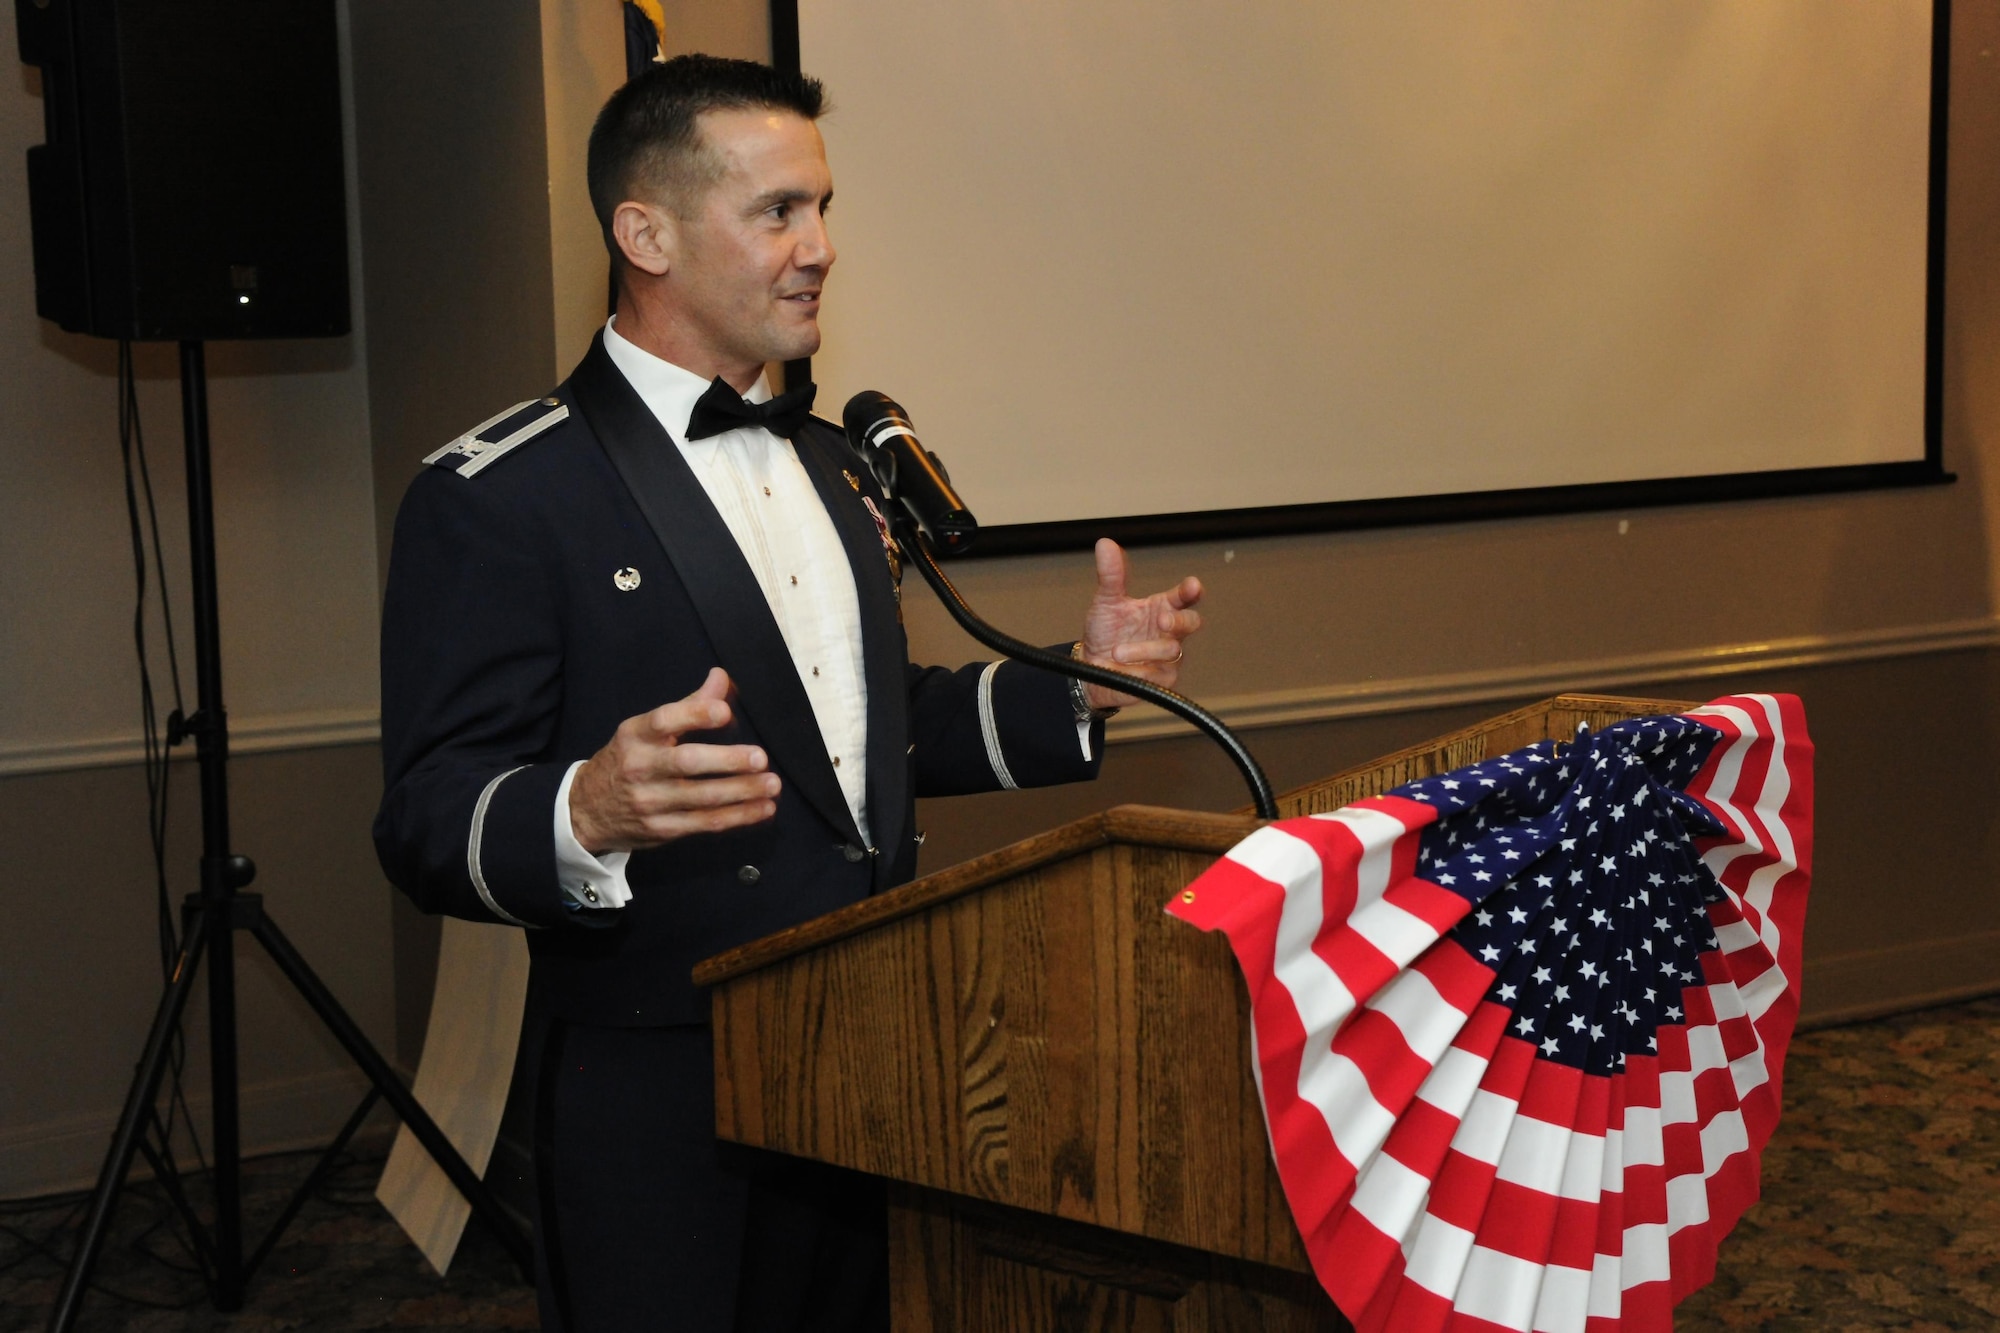 Col. Charles Velino, 47th Flying Training Wing commander, gives closing remarks attendees at the Air Force Ball on Laughlin Air Force Base, Texas, Sept. 30, 2017.  The Air Force Ball is an observance of the U.S. Air Force transitioning into its own branch of the U.S. Armed Forces on Sept. 18, 1947.